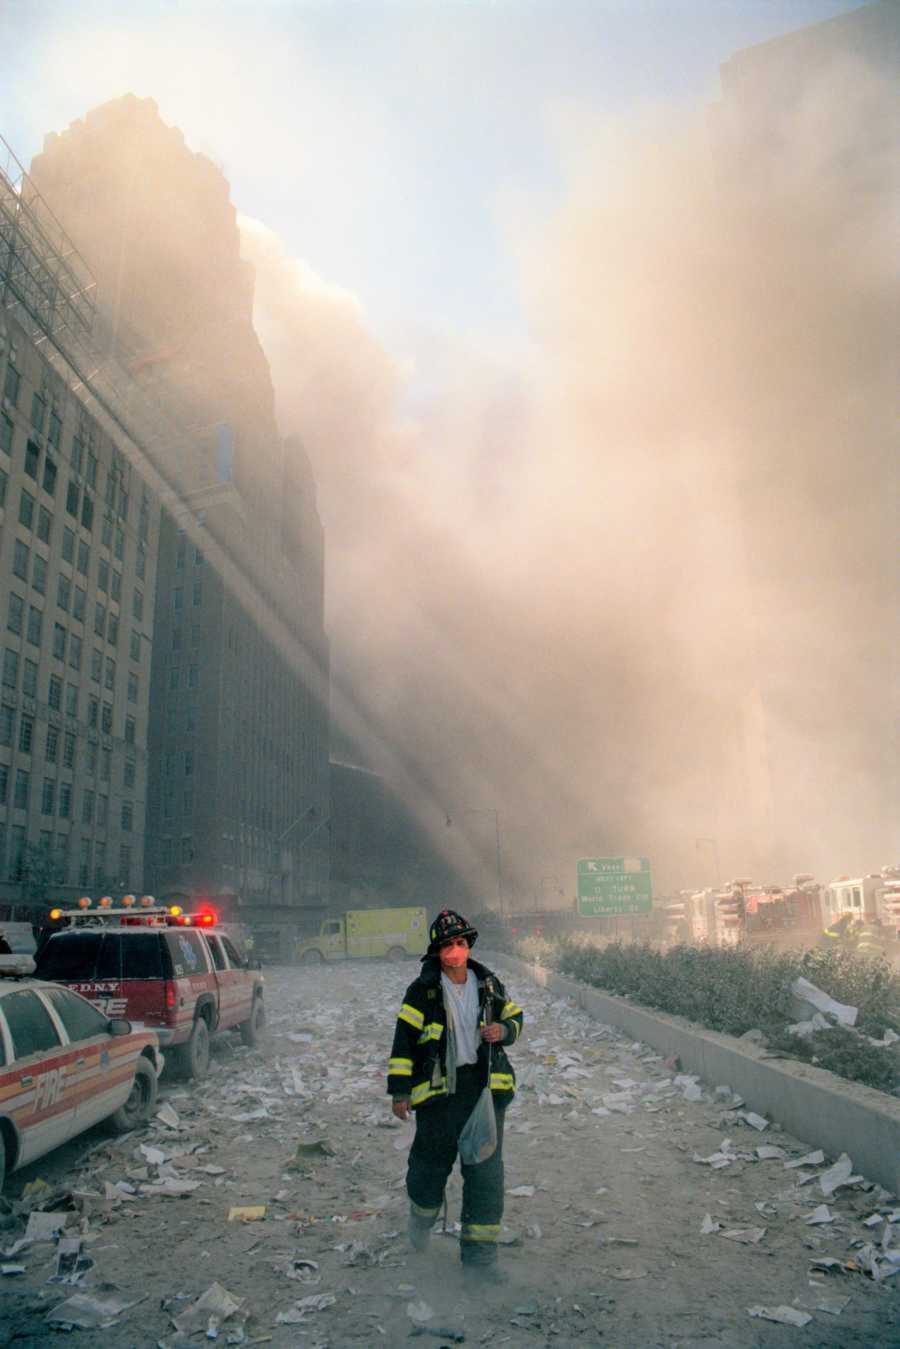 First responder trudges through the smoke as the towers burn